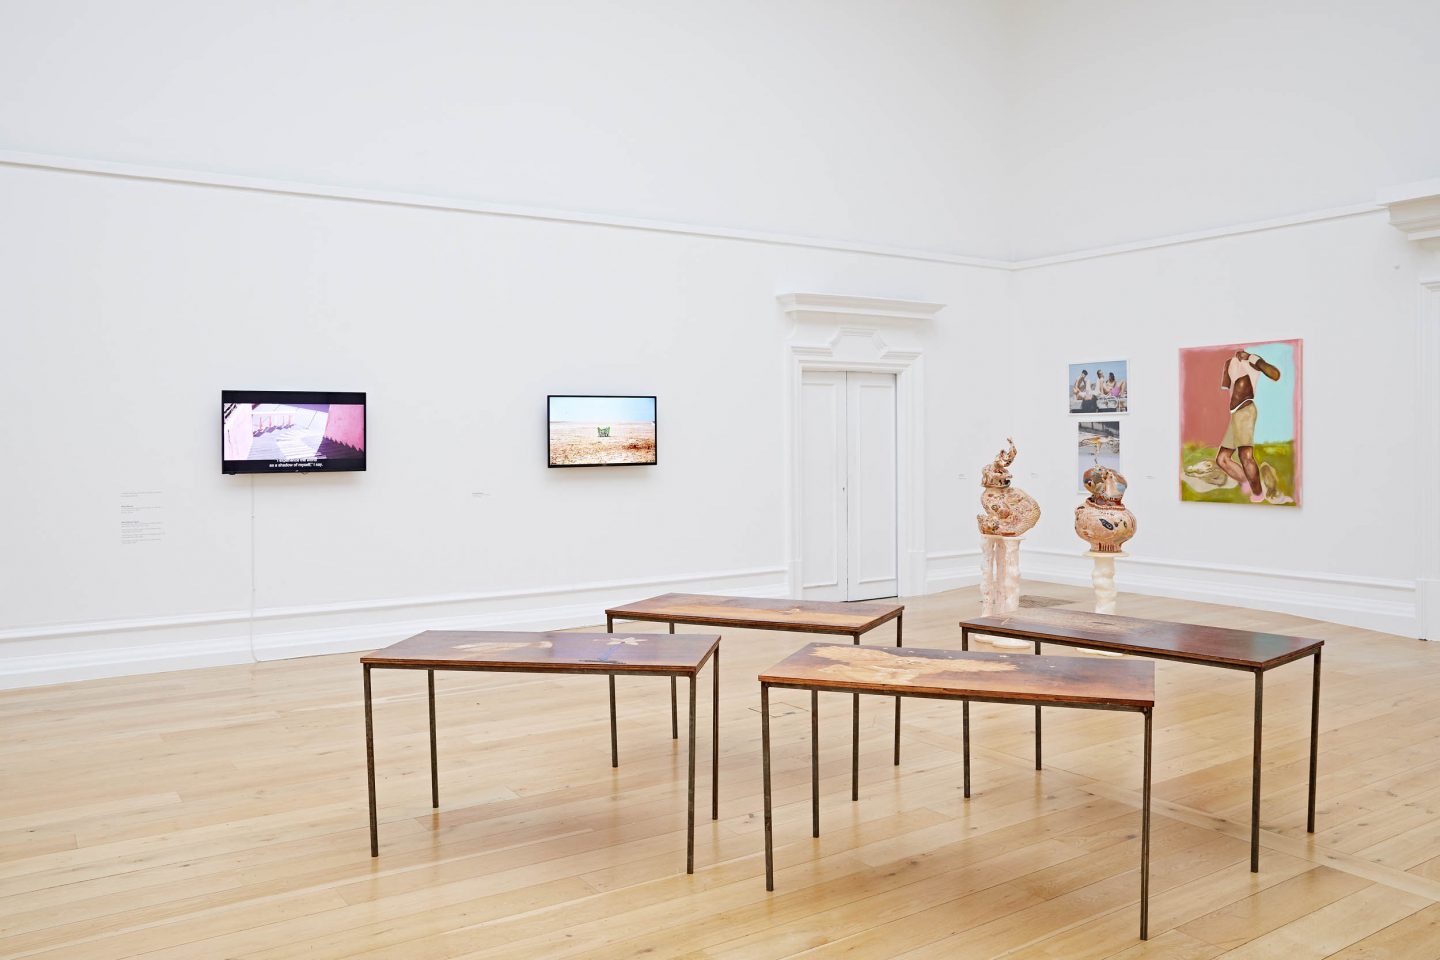 Bloomberg New Contemporaries 2020, installation view at the South London Gallery. Photo: Andy Stagg
